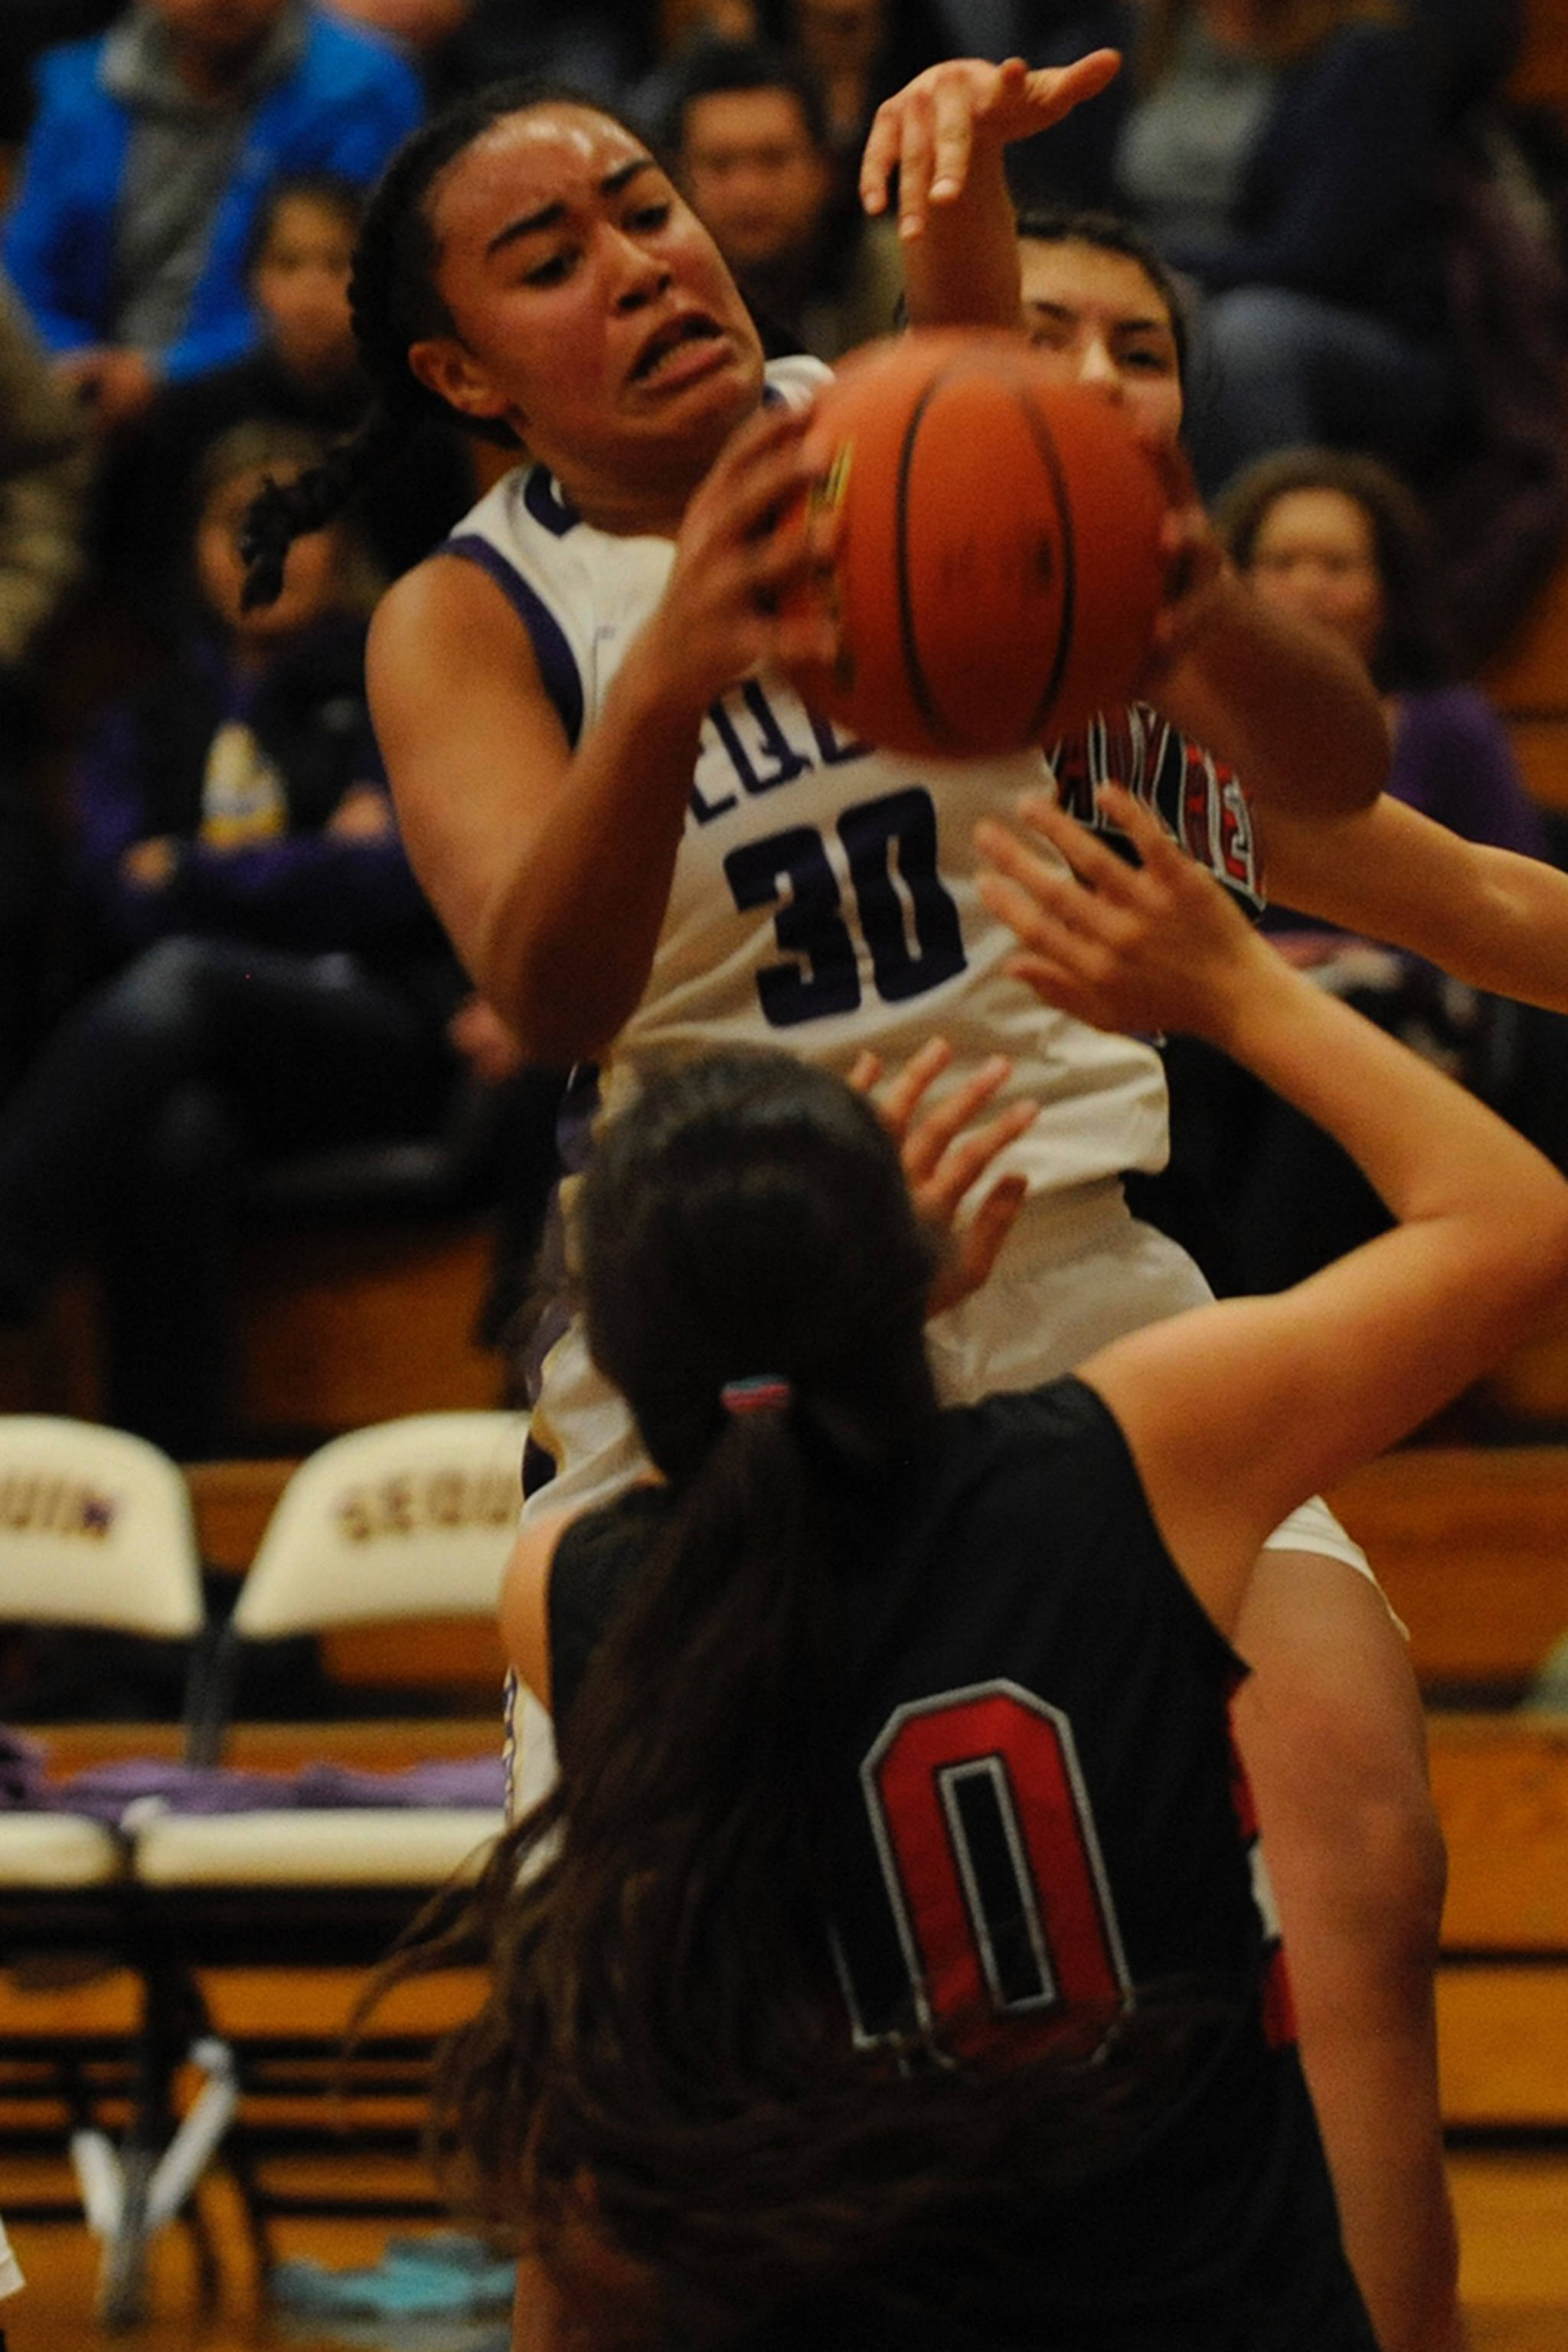 Jaylah Julmist (30) gets fouled while getting an offensive rebound in the second quarter against Neah Bay during the Sequim Wolves’ 86-63 win on Dec. 4. Sequim Gazette photo by Conor Dowley